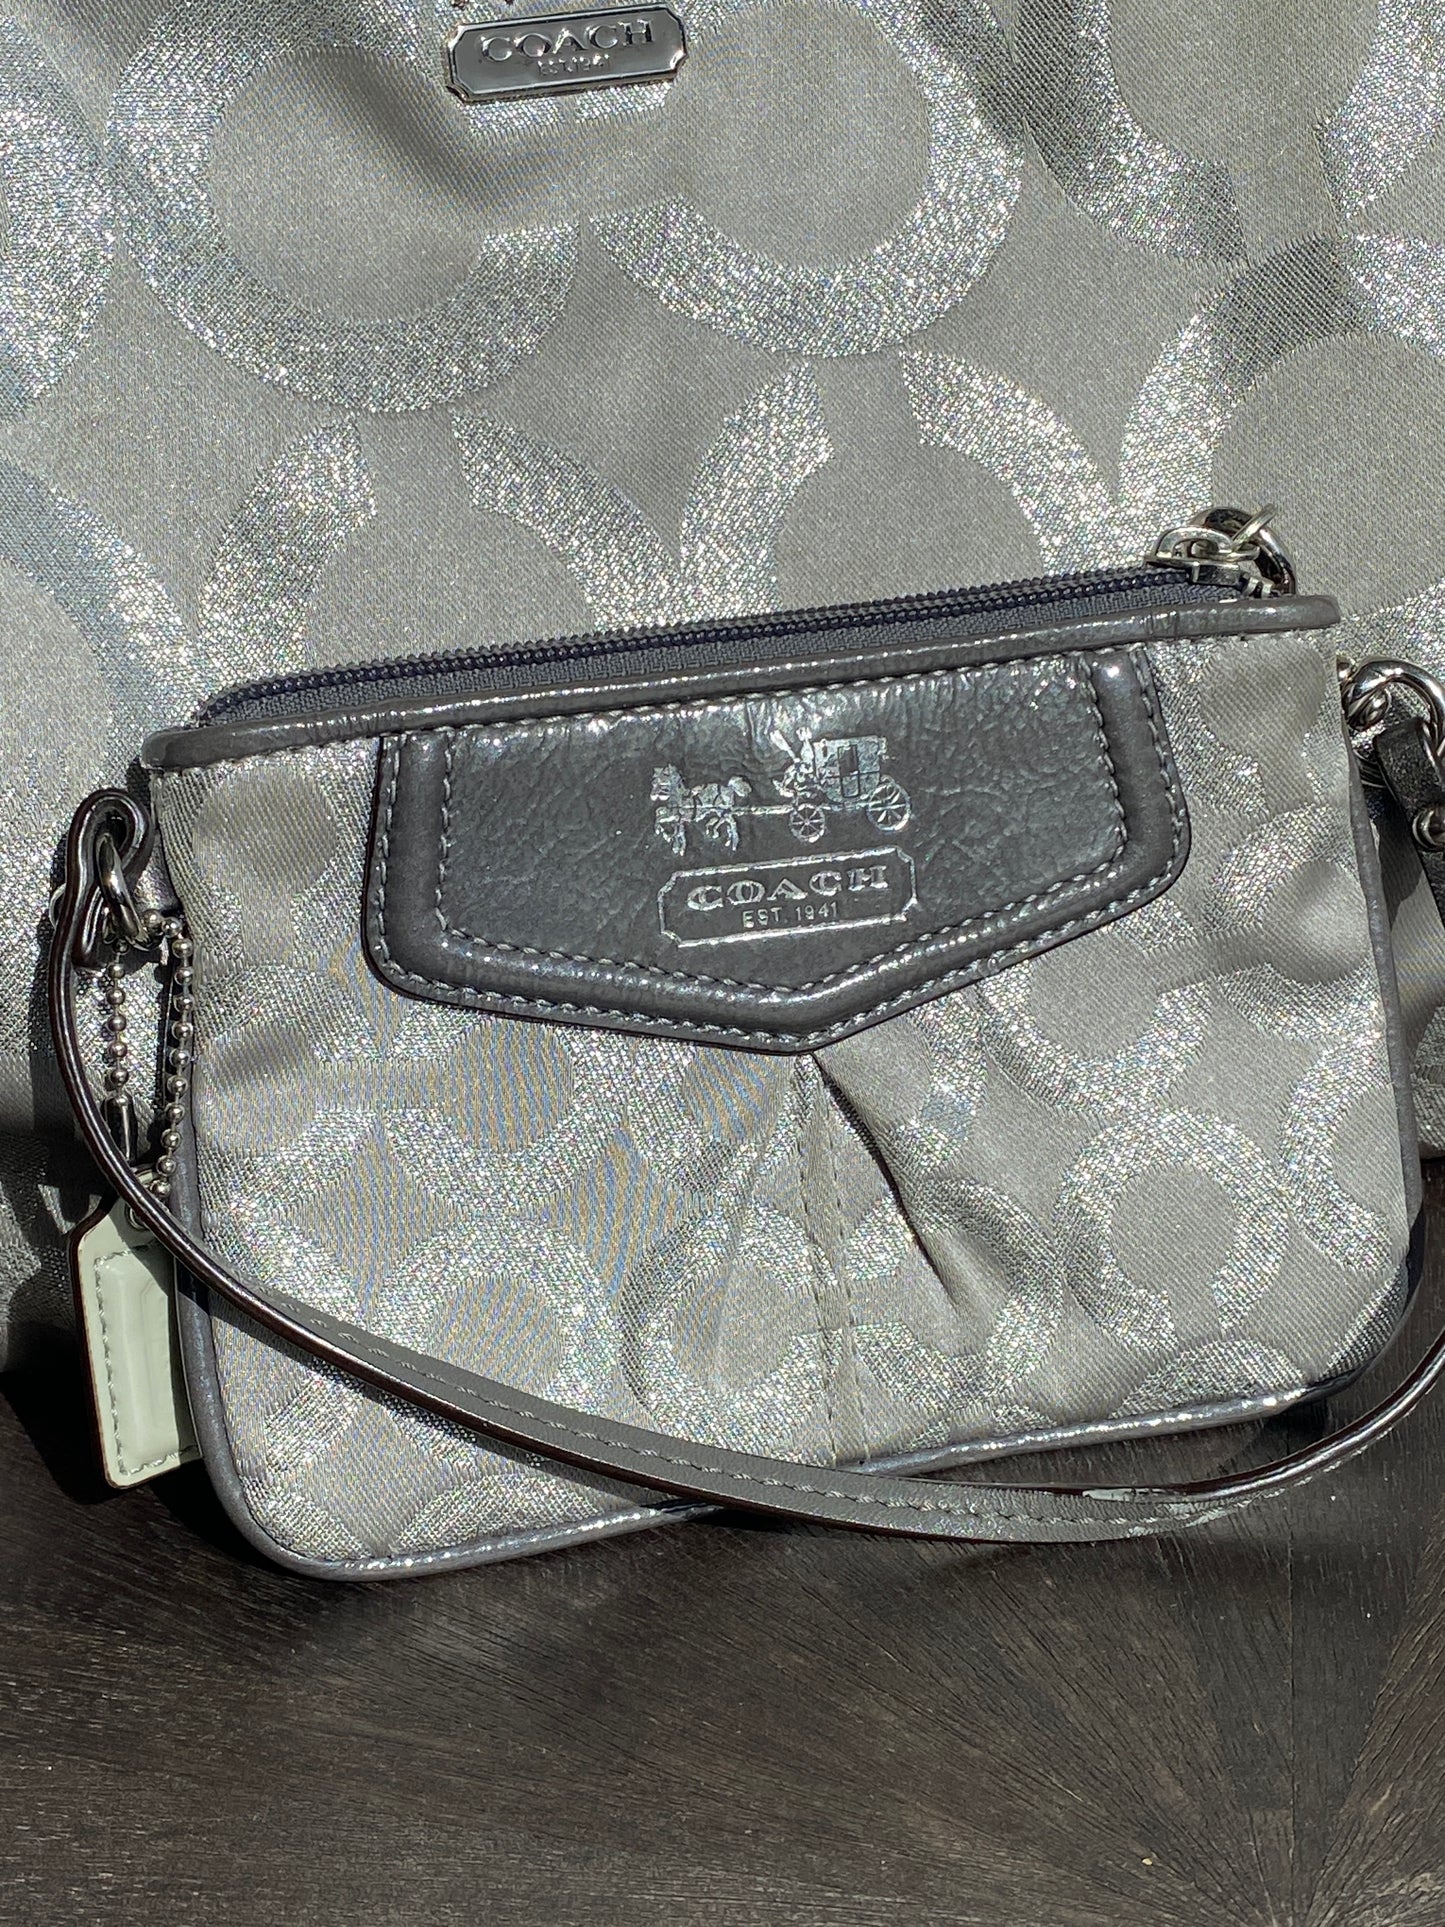 Authentic Coach Madison “Maggie” Handbag and Wallet